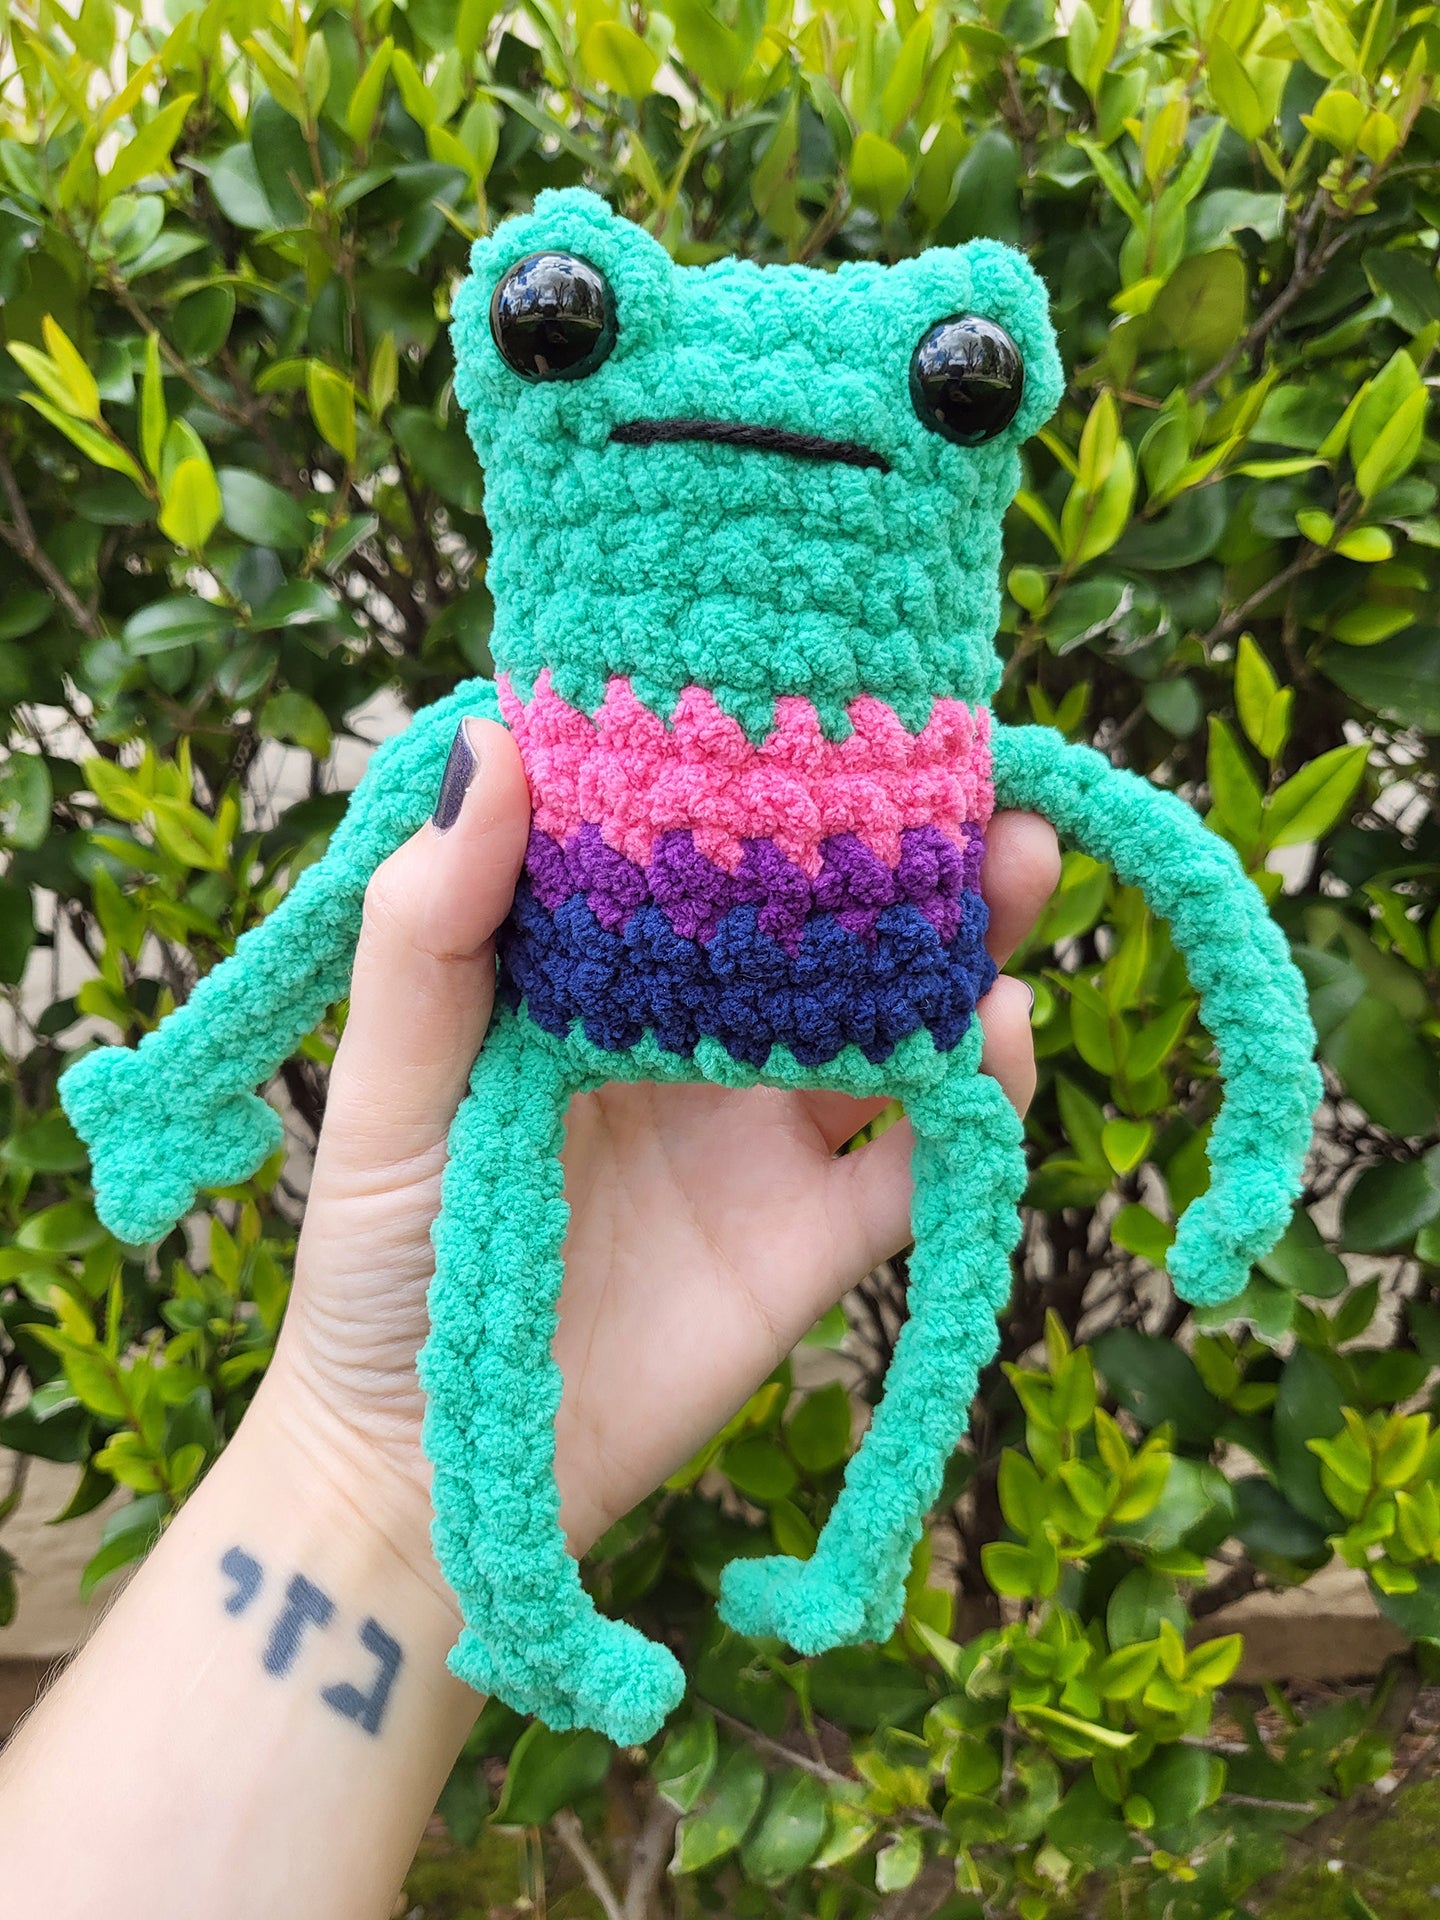 PRIDE Frog Plushies | Made by queer artist!